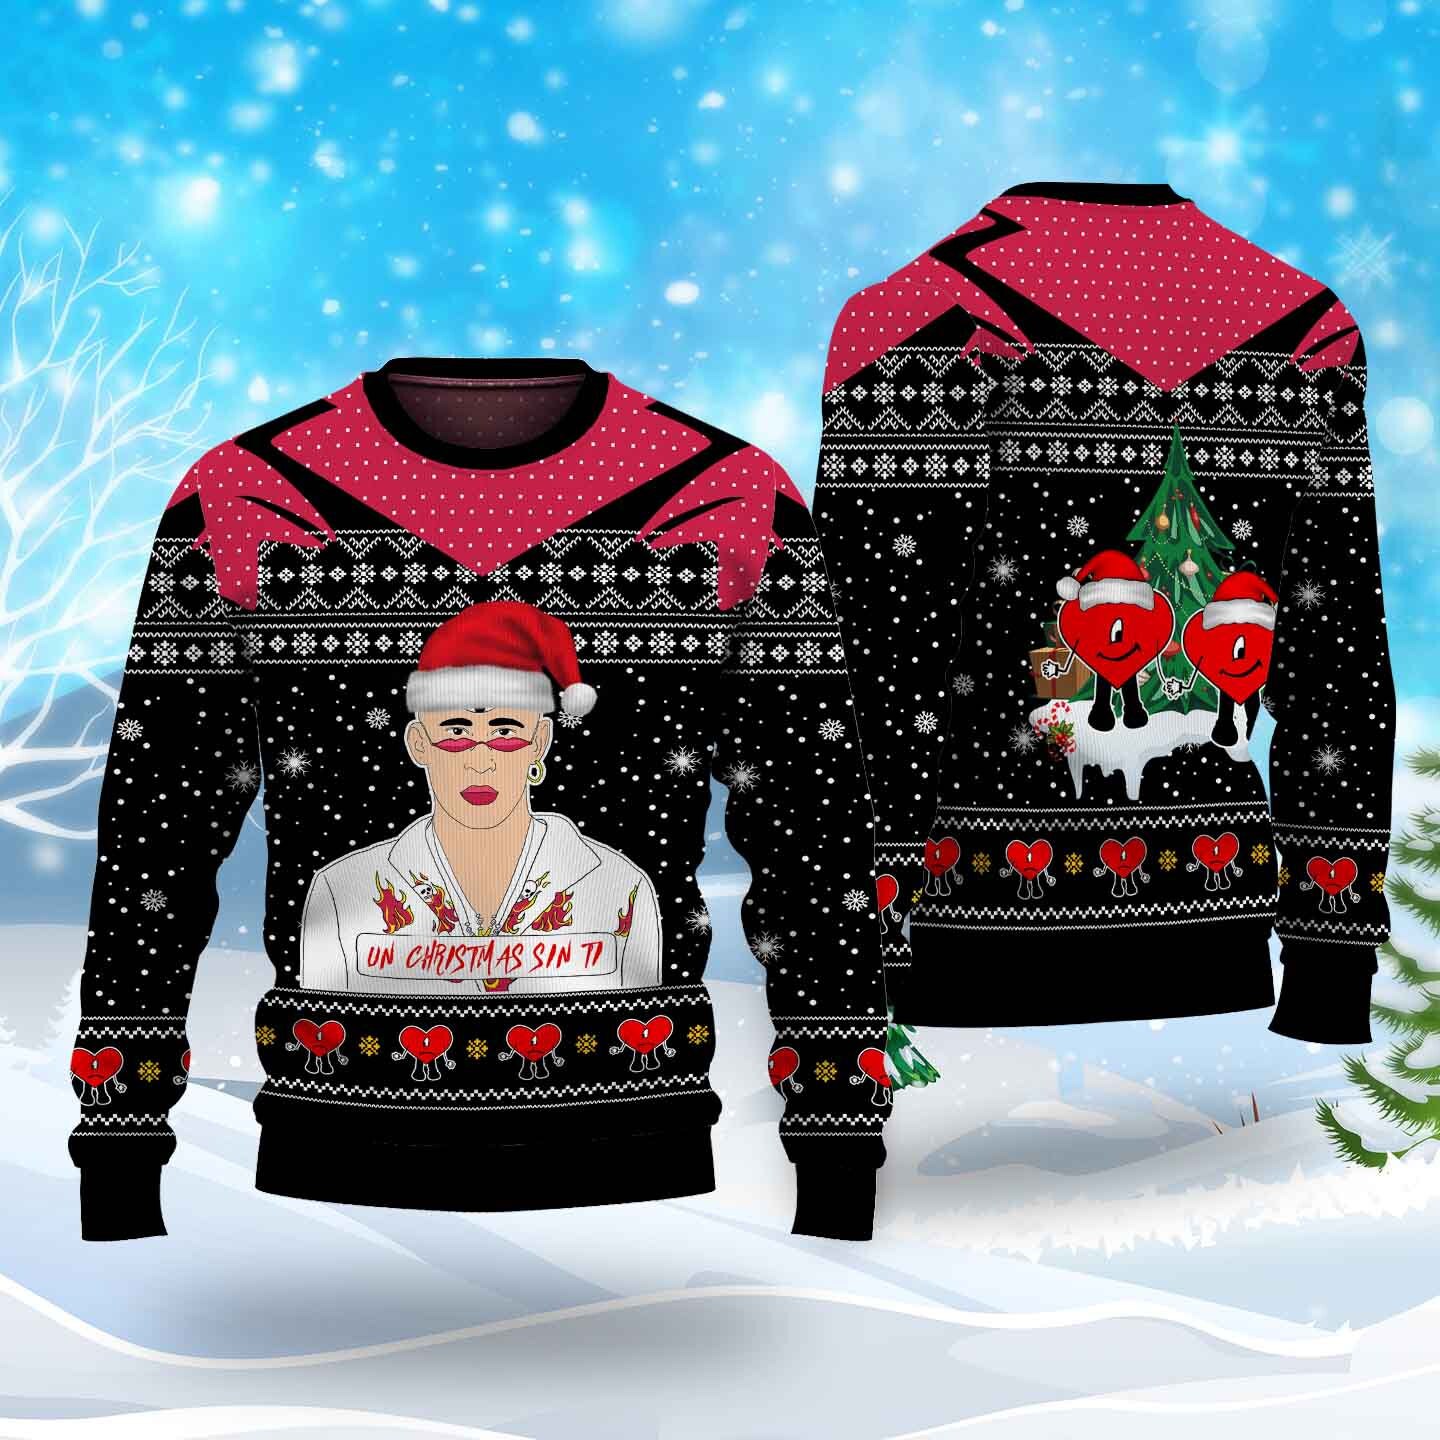 Un Chirstmas Sin Ti Bad Bunny Ugly Bad Bunny 2022 Ugly 2022 Christmas Happy Xmas Wool Knitted Sweater